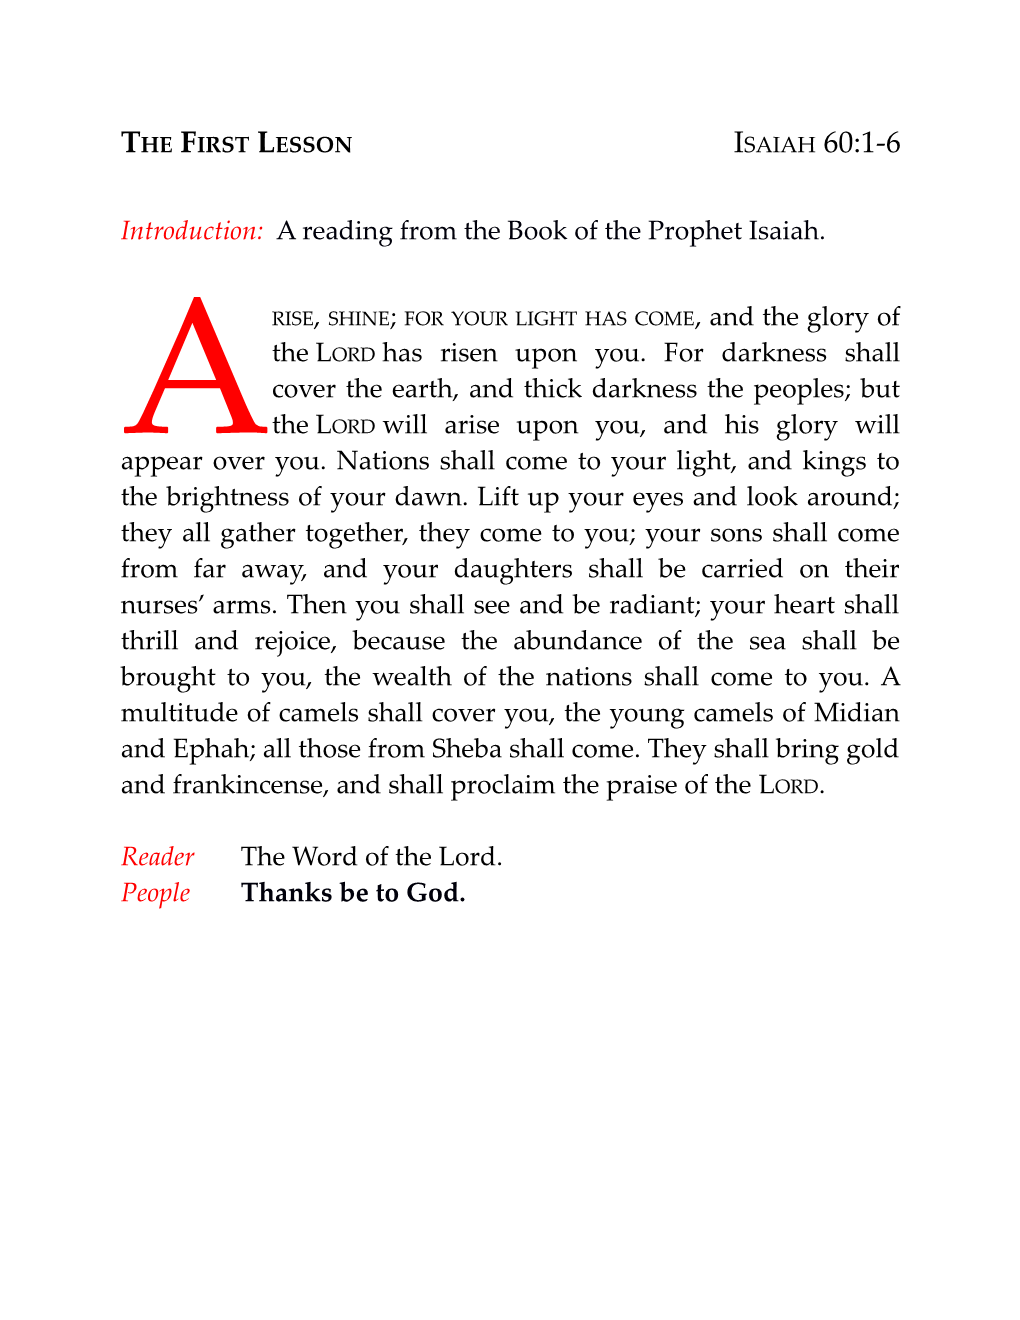 Introduction: a Reading from the Book of the Prophet Isaiah